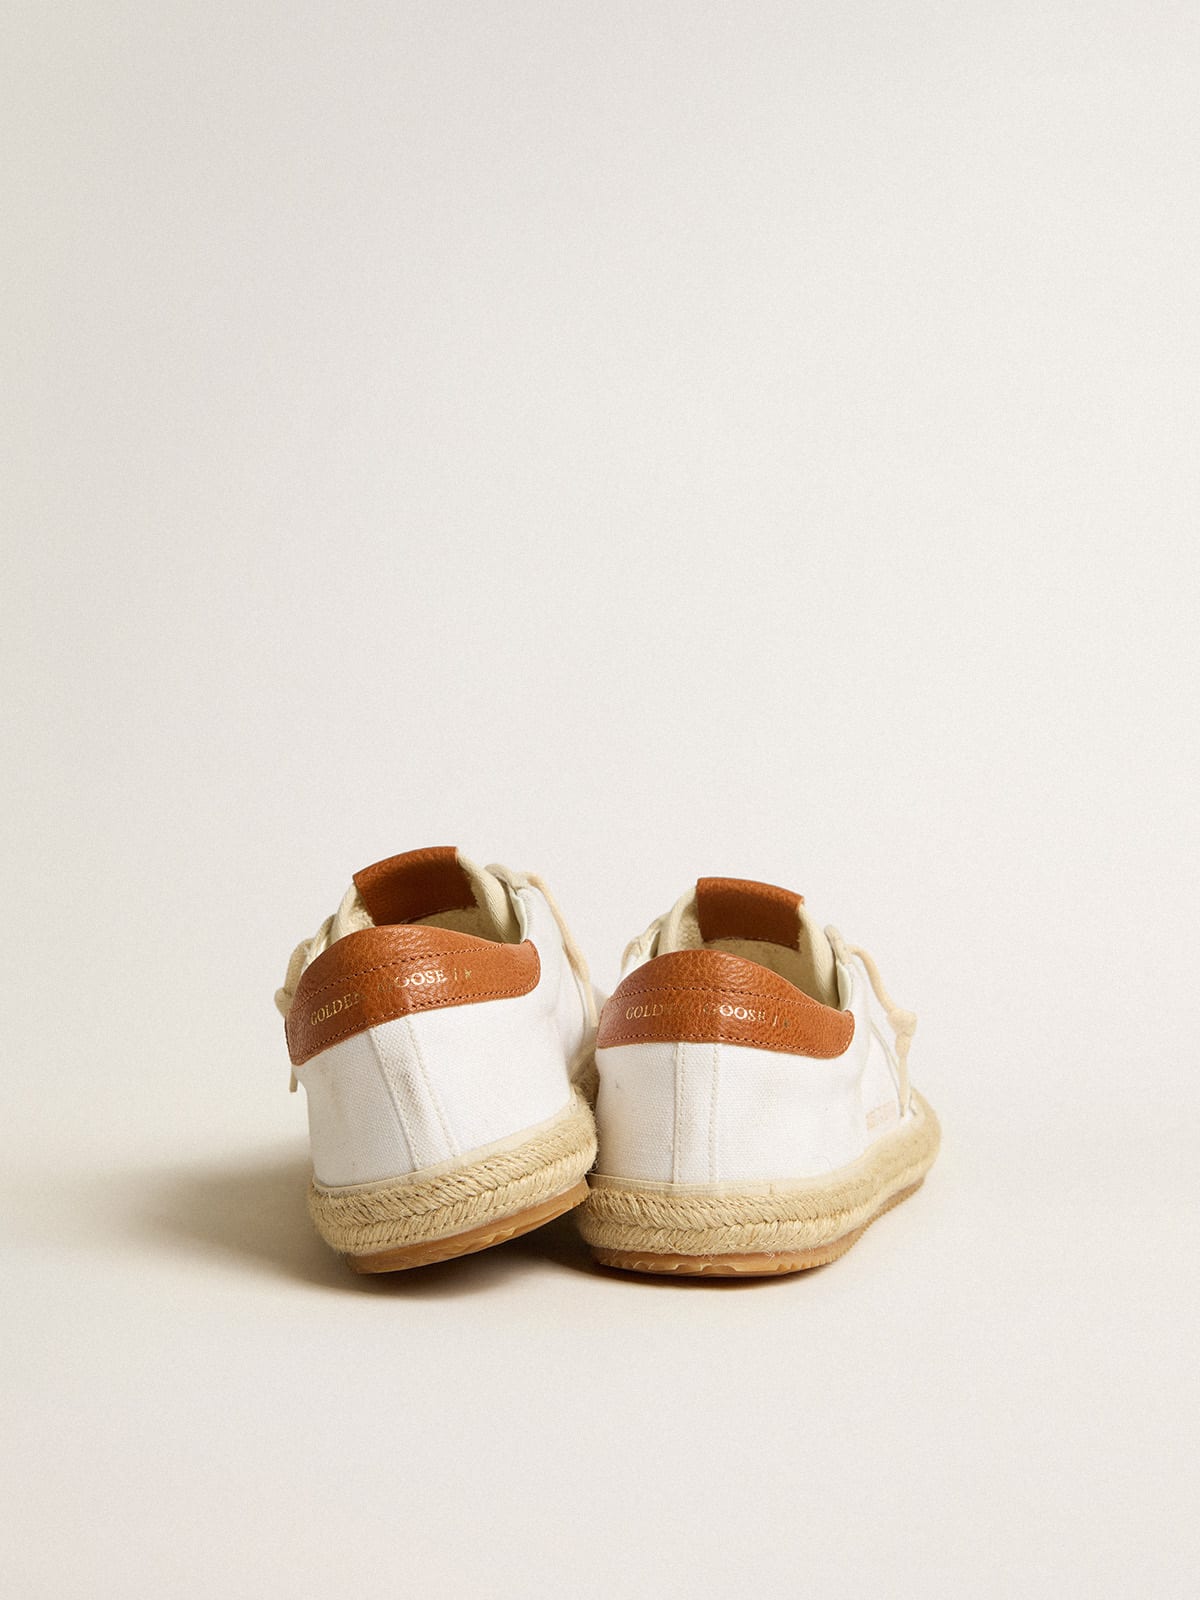 Golden Goose - Men’s Super-Star LTD in canvas with white leather star and raffia toe in 